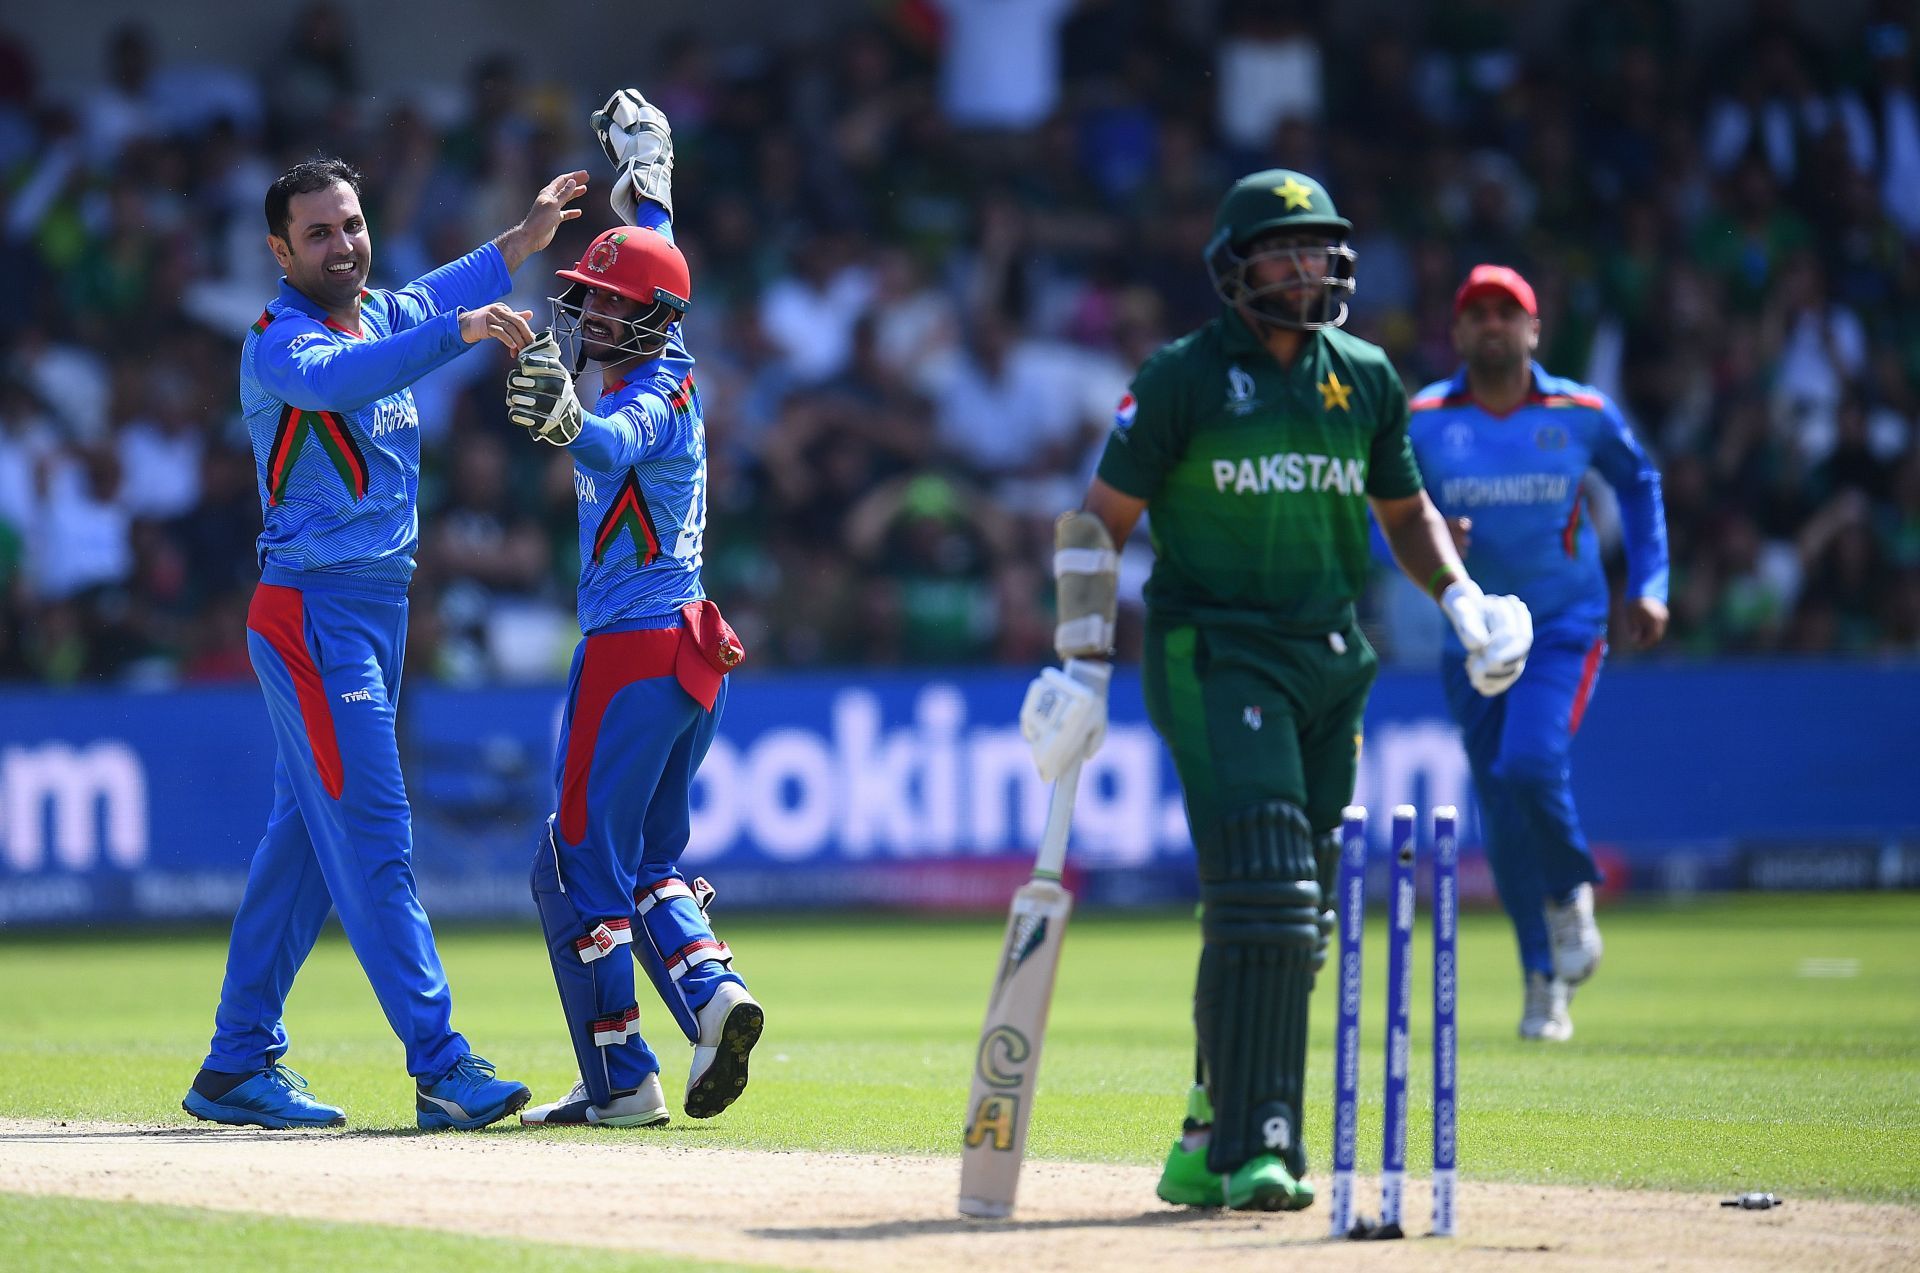 Pakistan were given a scare at the 2019 Word Cup